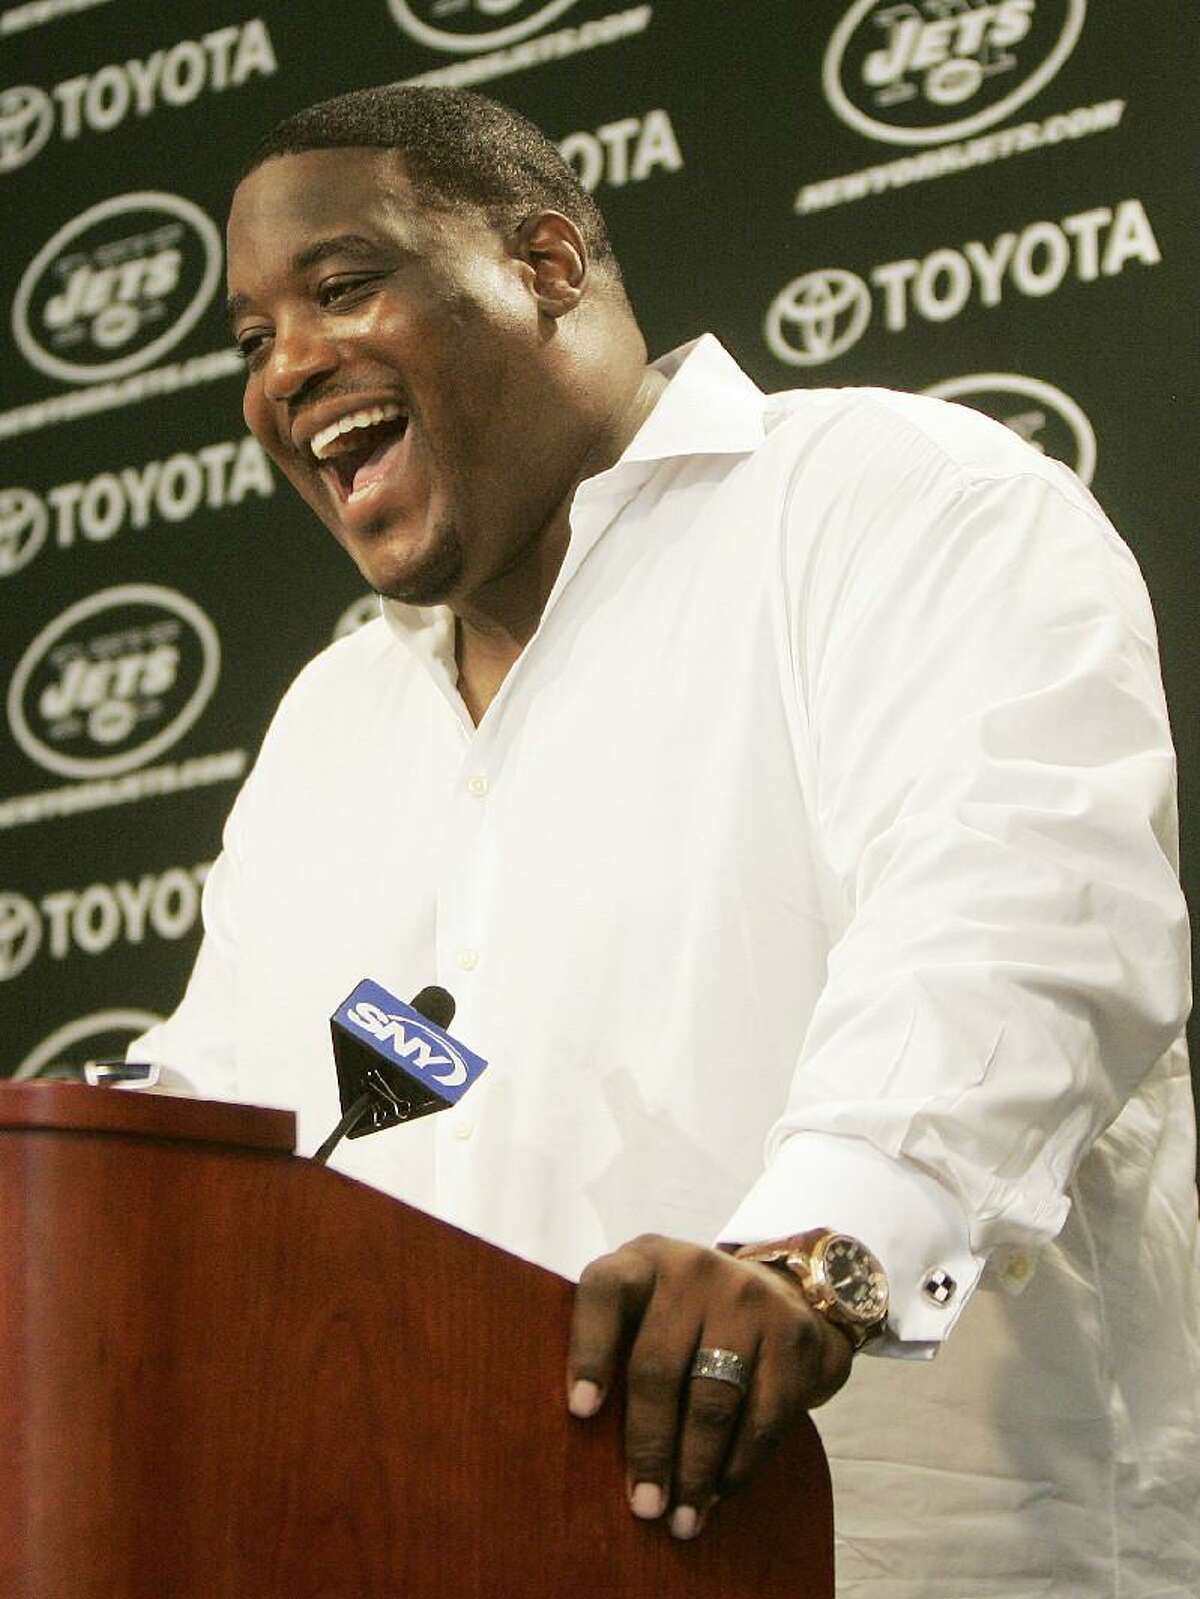 The Unstoppable Damien Woody: Versatile Former NY Jet and Family